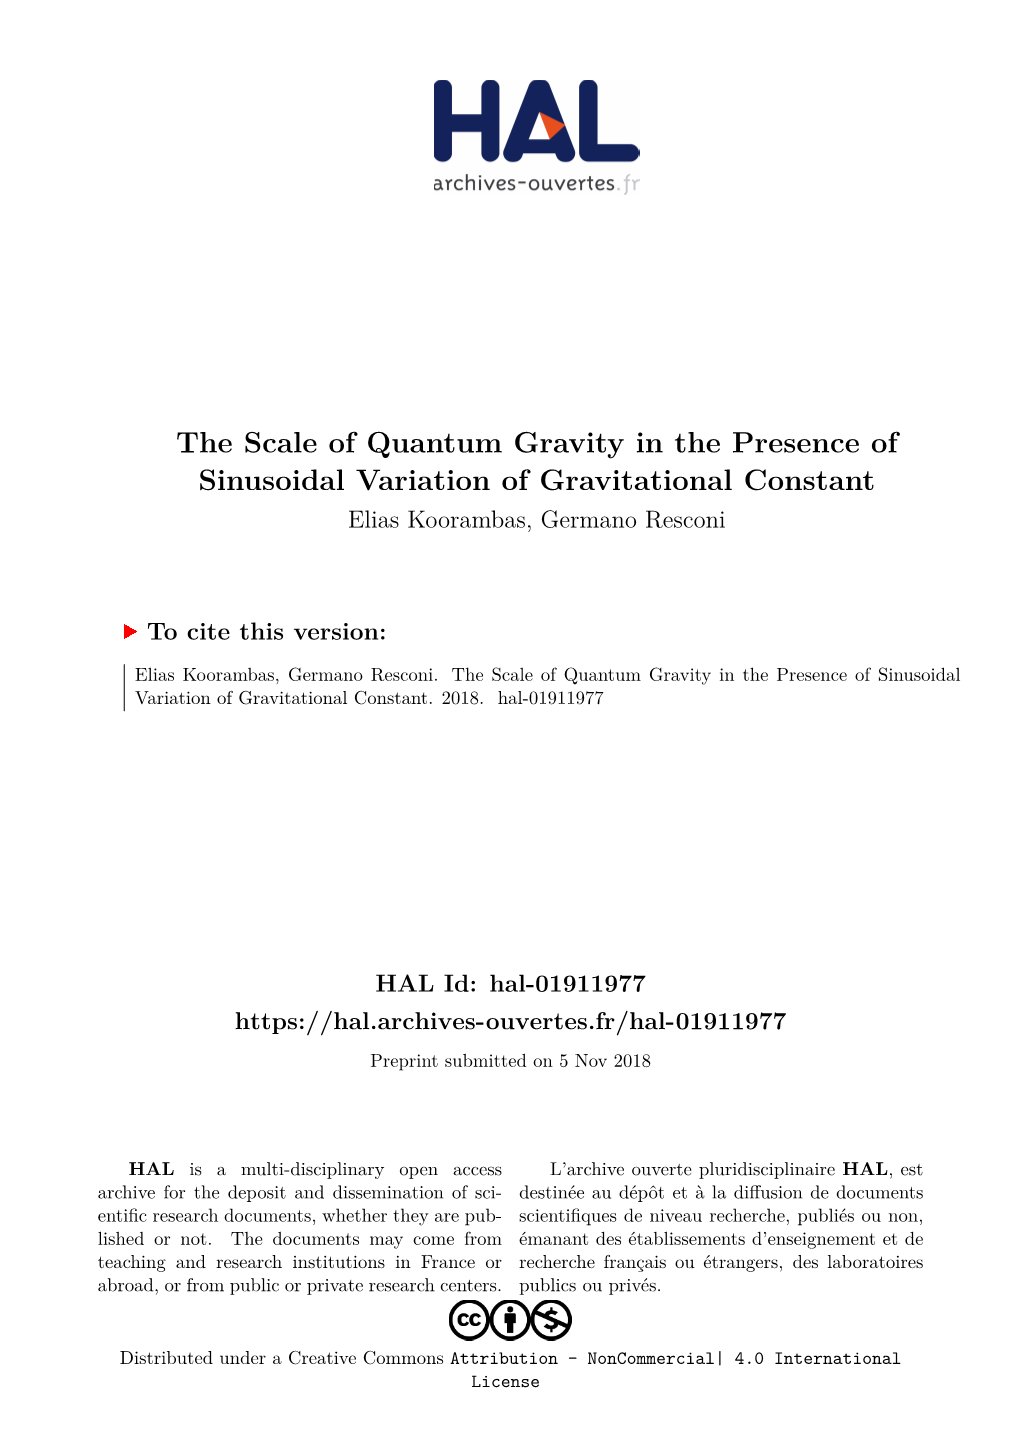 The Scale of Quantum Gravity in the Presence of Sinusoidal Variation of Gravitational Constant Elias Koorambas, Germano Resconi